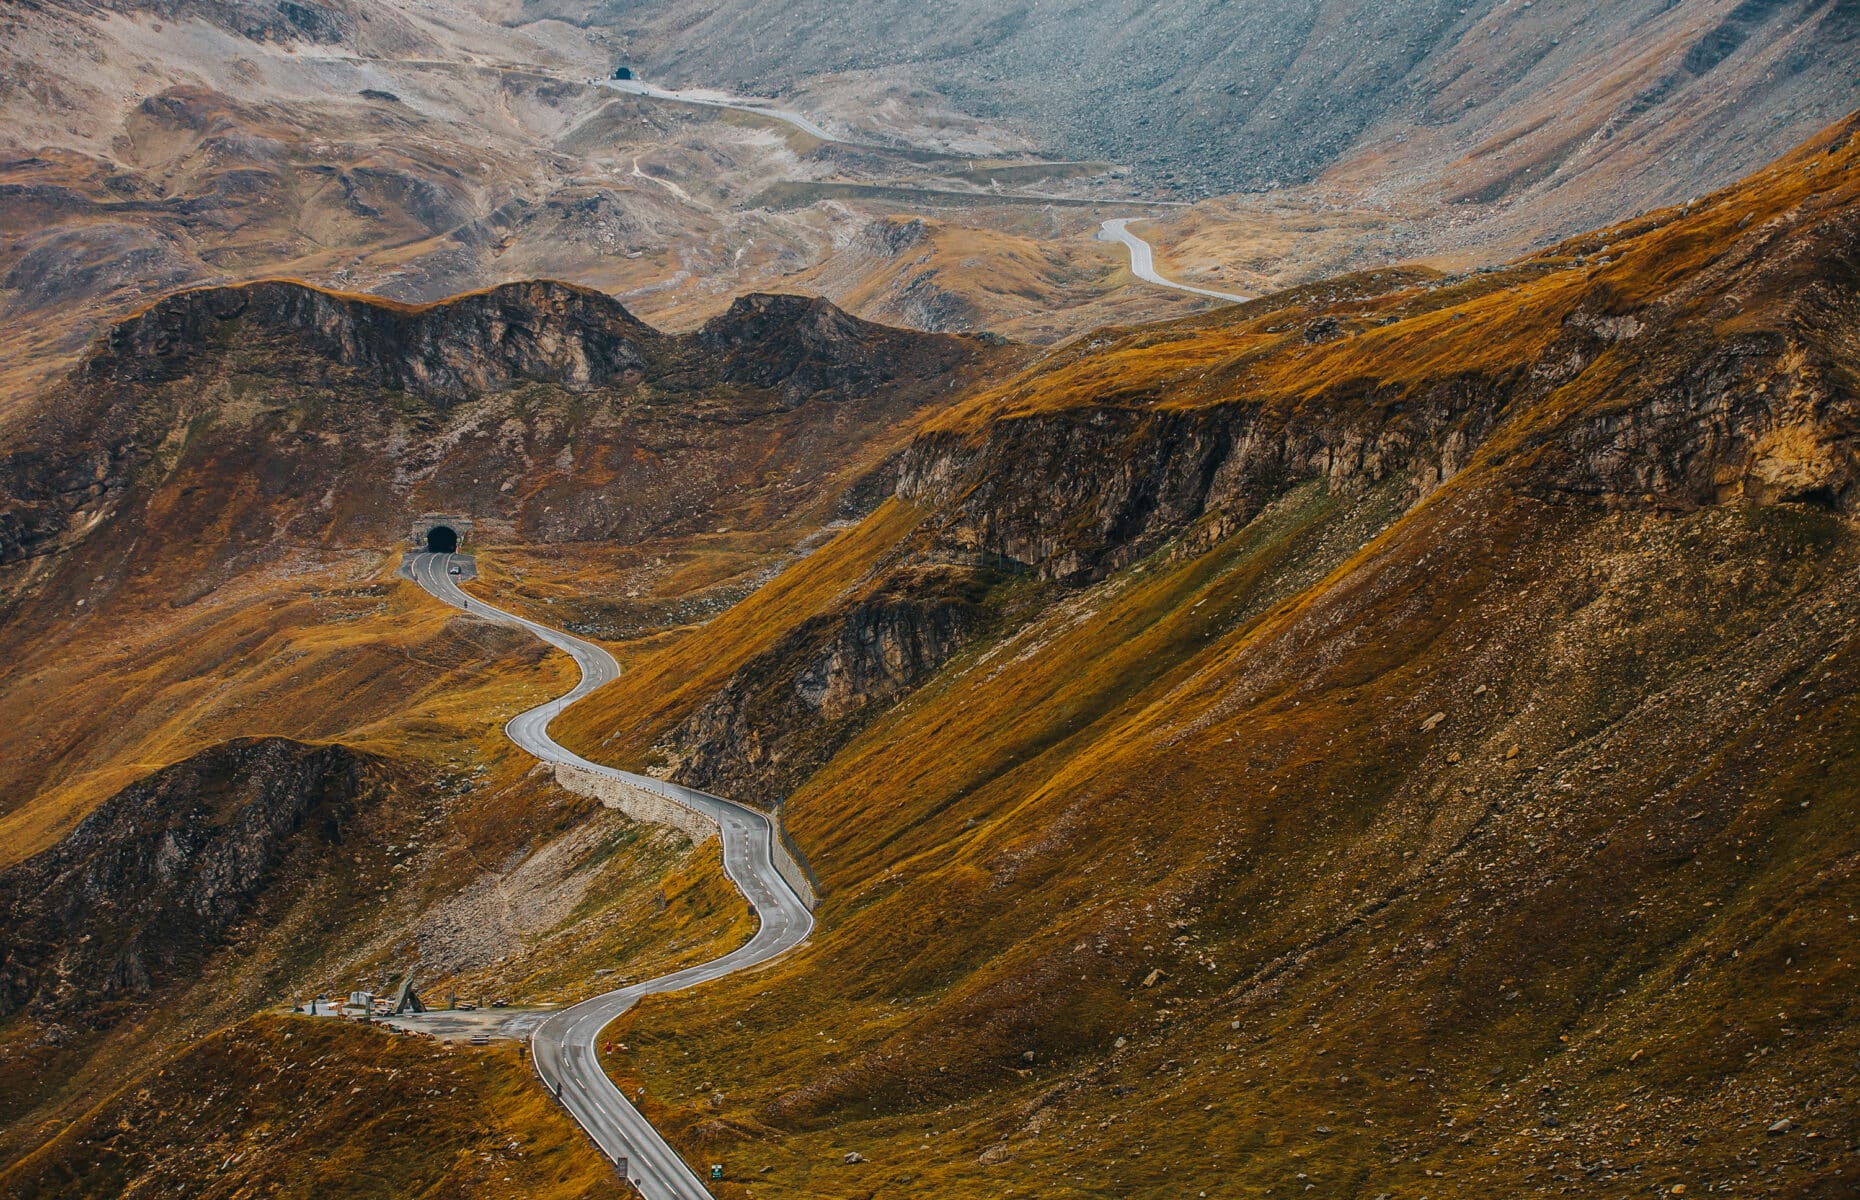 Beautiful landscape from the Grossglockner National Park Hohe Tauern, Austria. Alpine road in autumn and foggy weather.